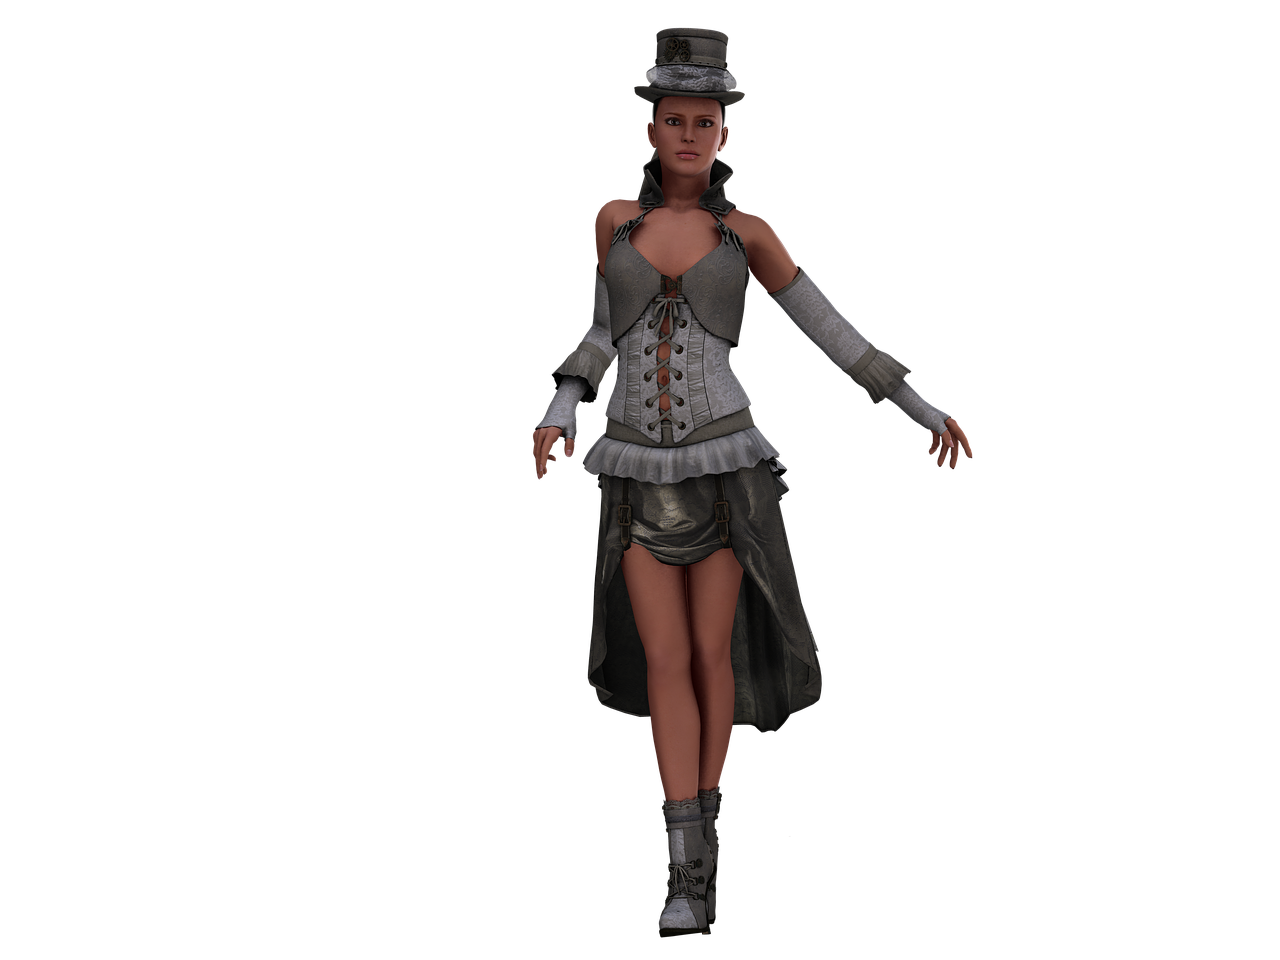 a 3d rendering of a woman in a dress and top hat, inspired by senior character artist, wearing a camisole and boots, metal garments, subsurface scattering skin, character model